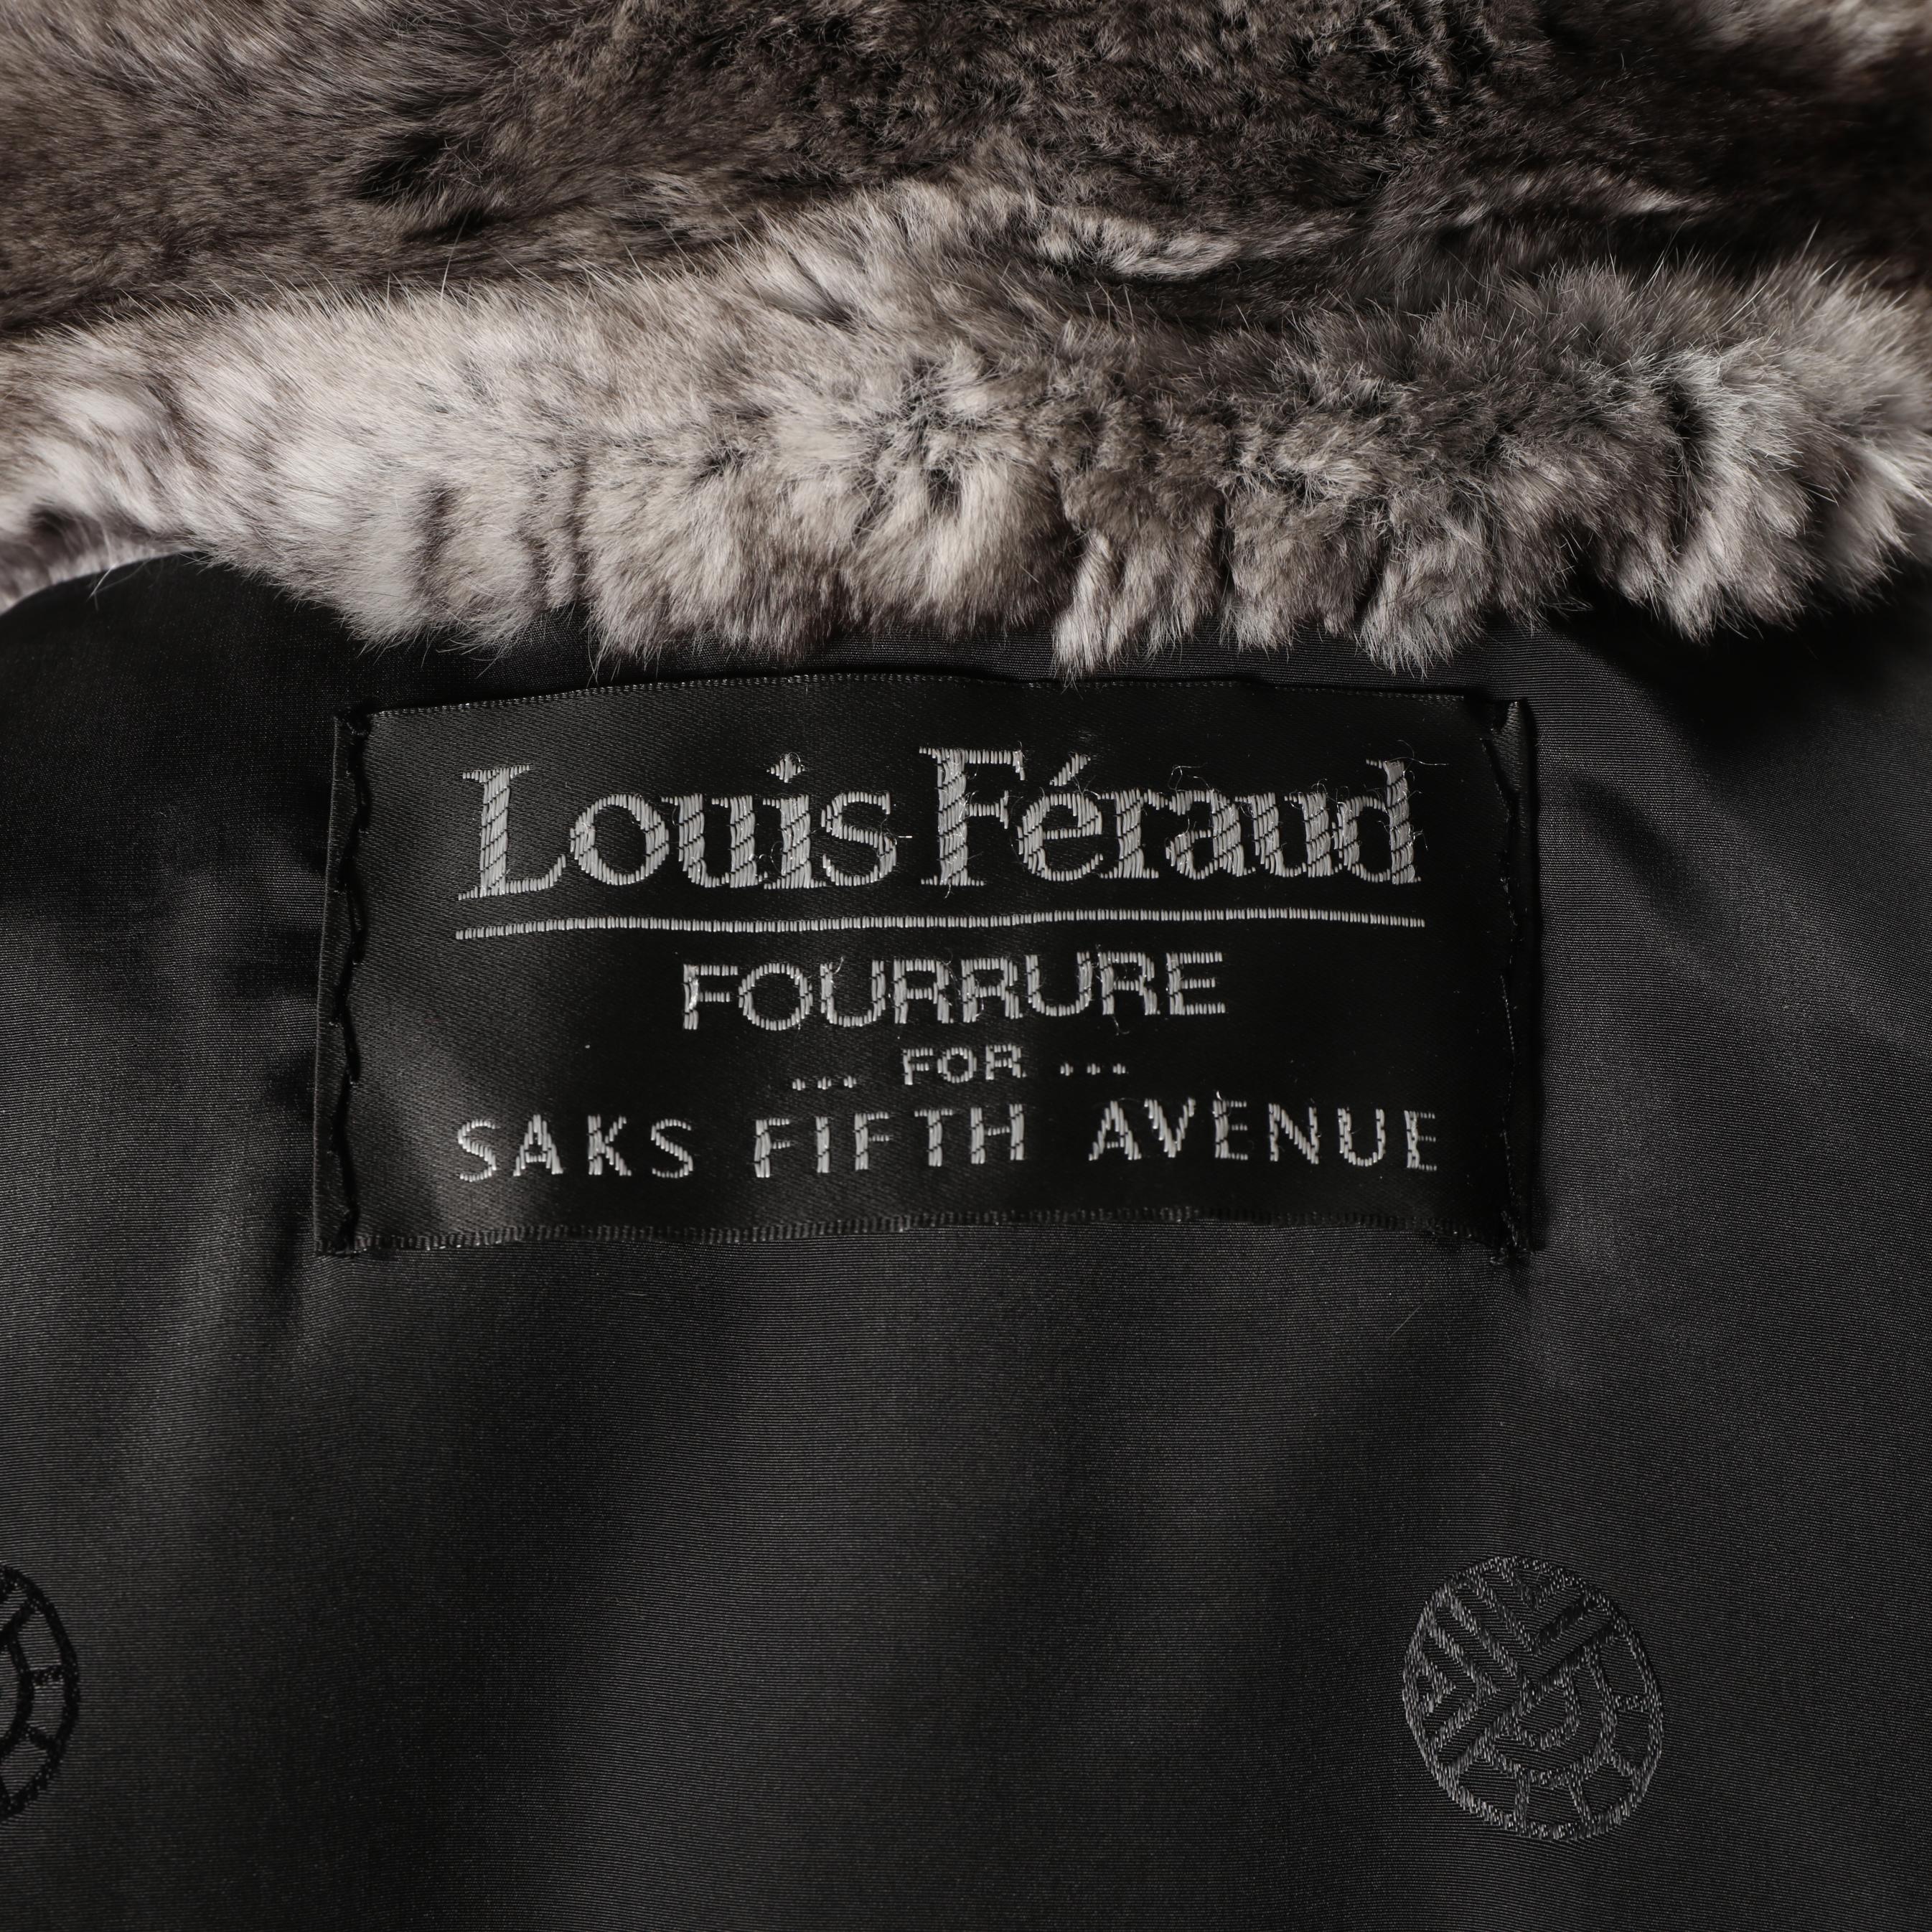 Sold at Auction: Saks Fifth Avenue Louis Feraud Coat